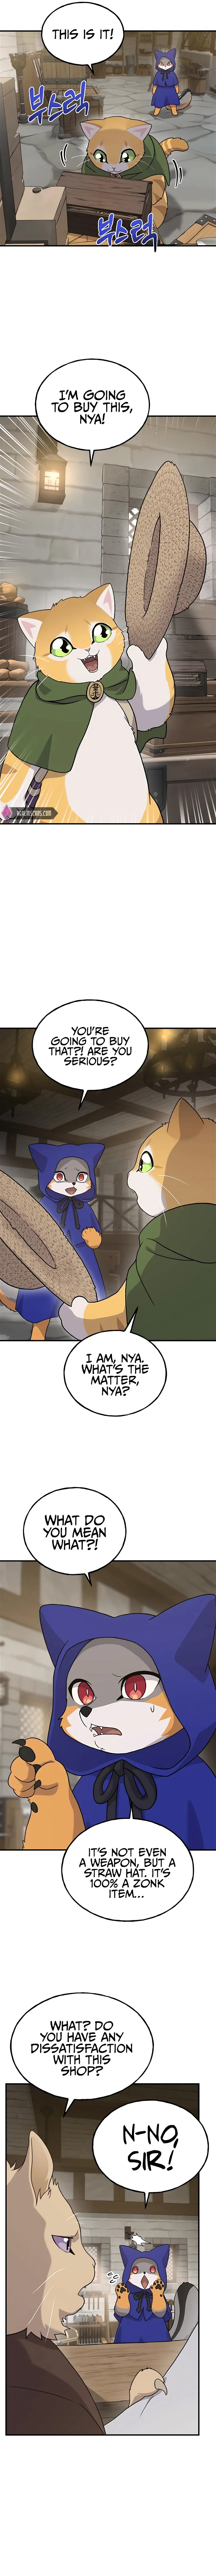 Solo Farming In The Tower Chapter 27 page 4